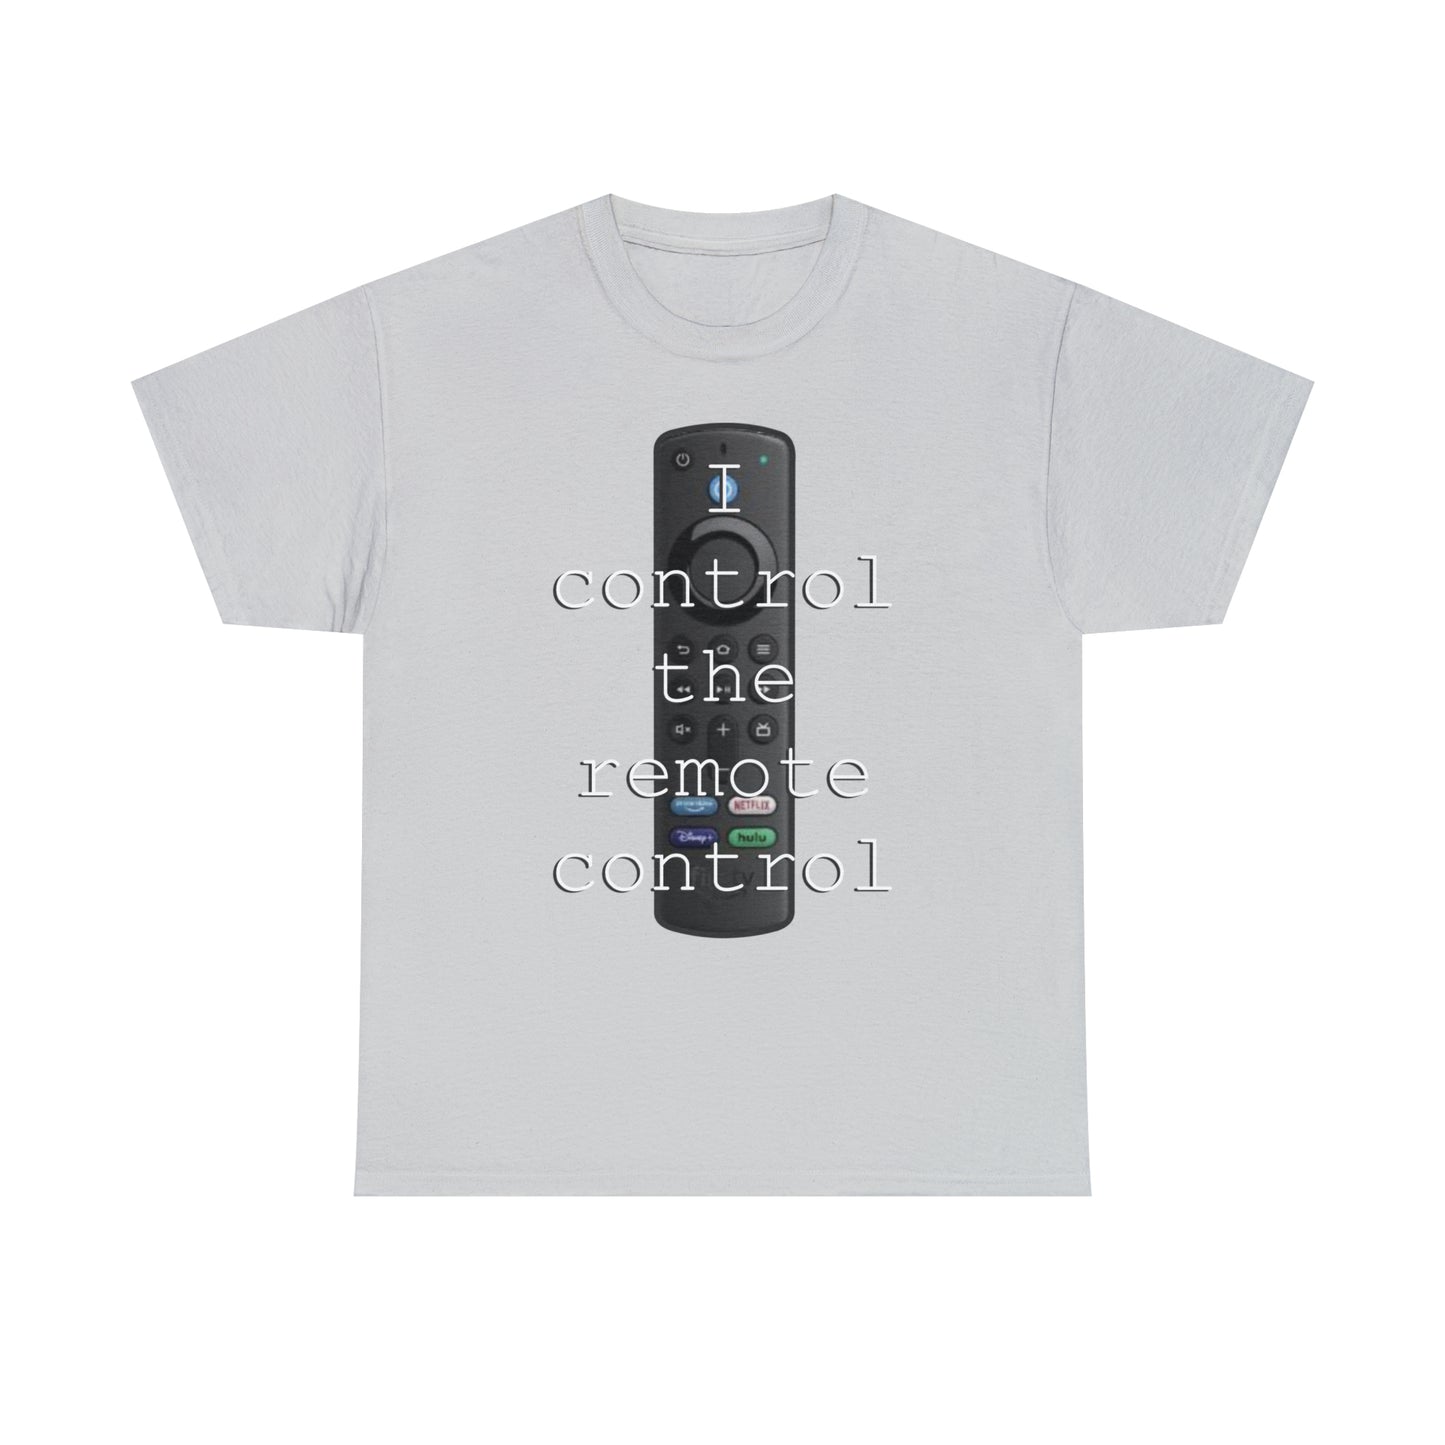 I control the remote control - Hurts Shirts Collection